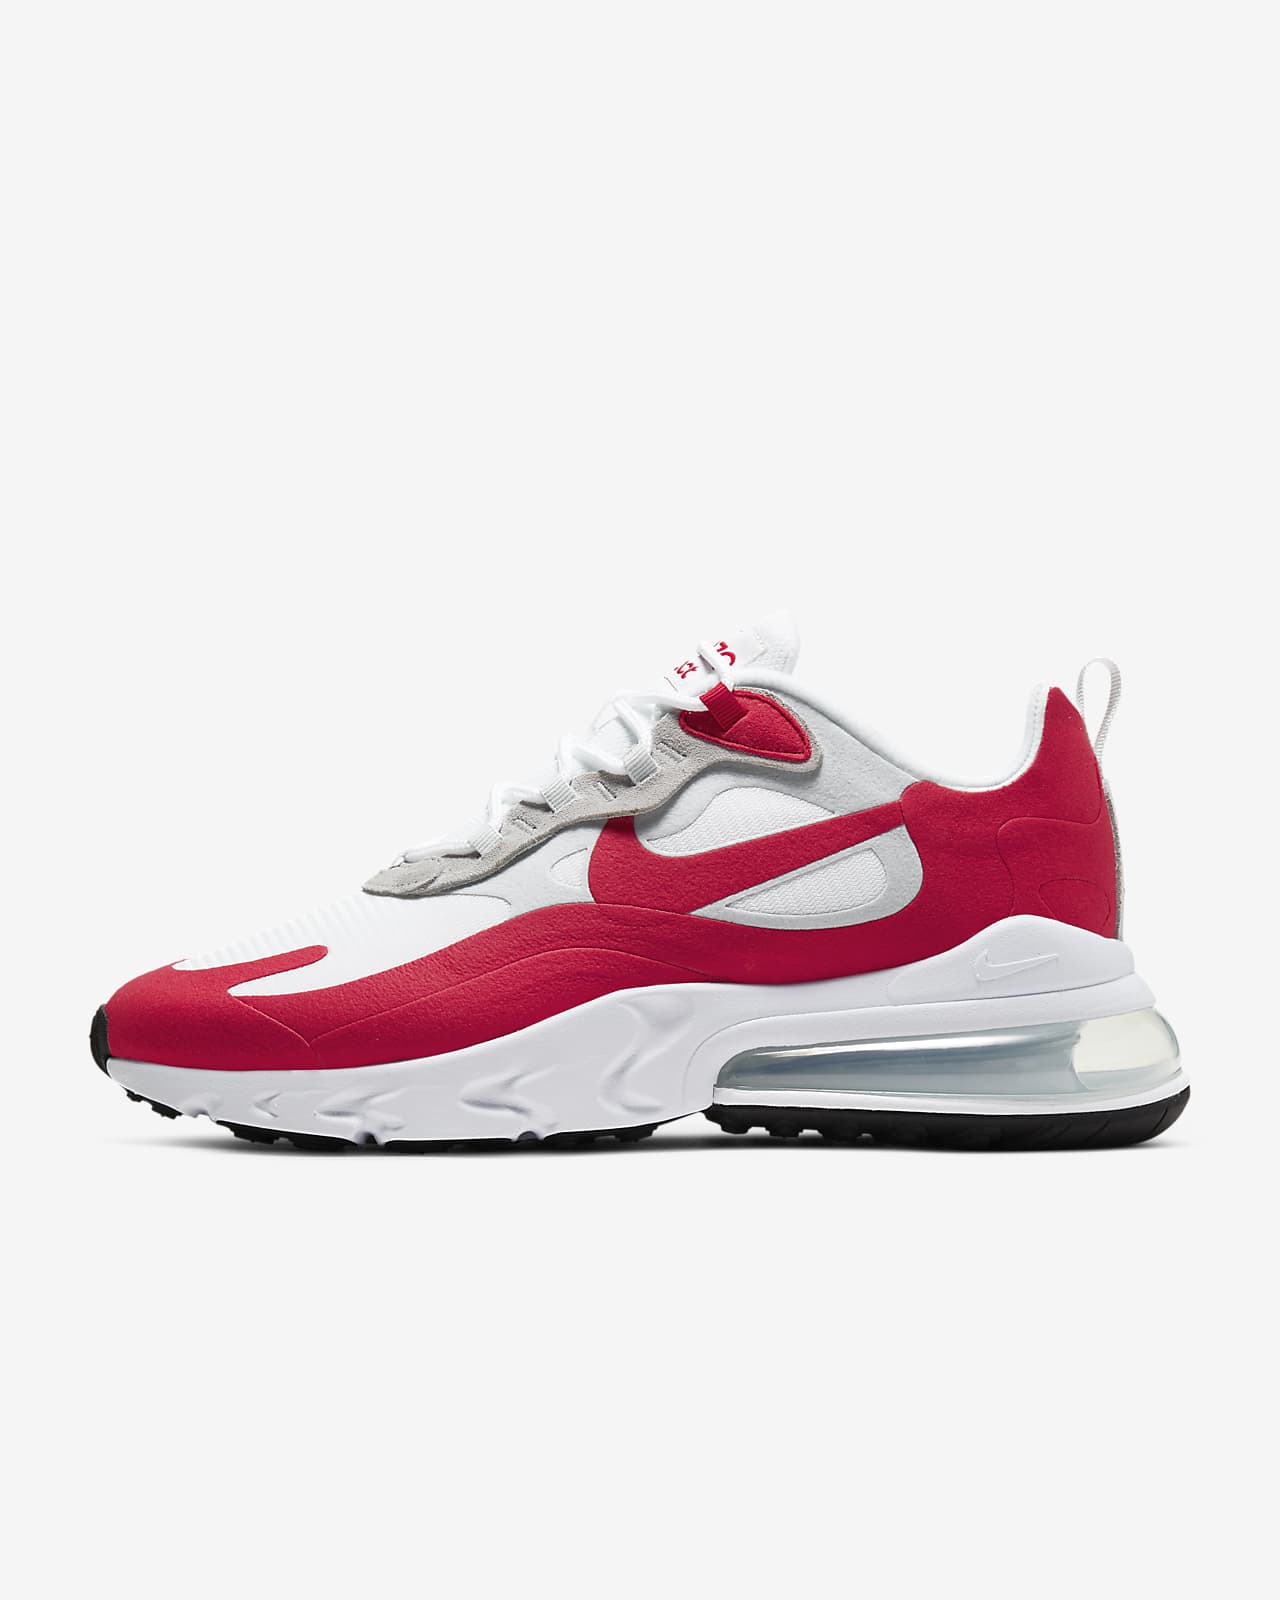 men's nike red and white shoes